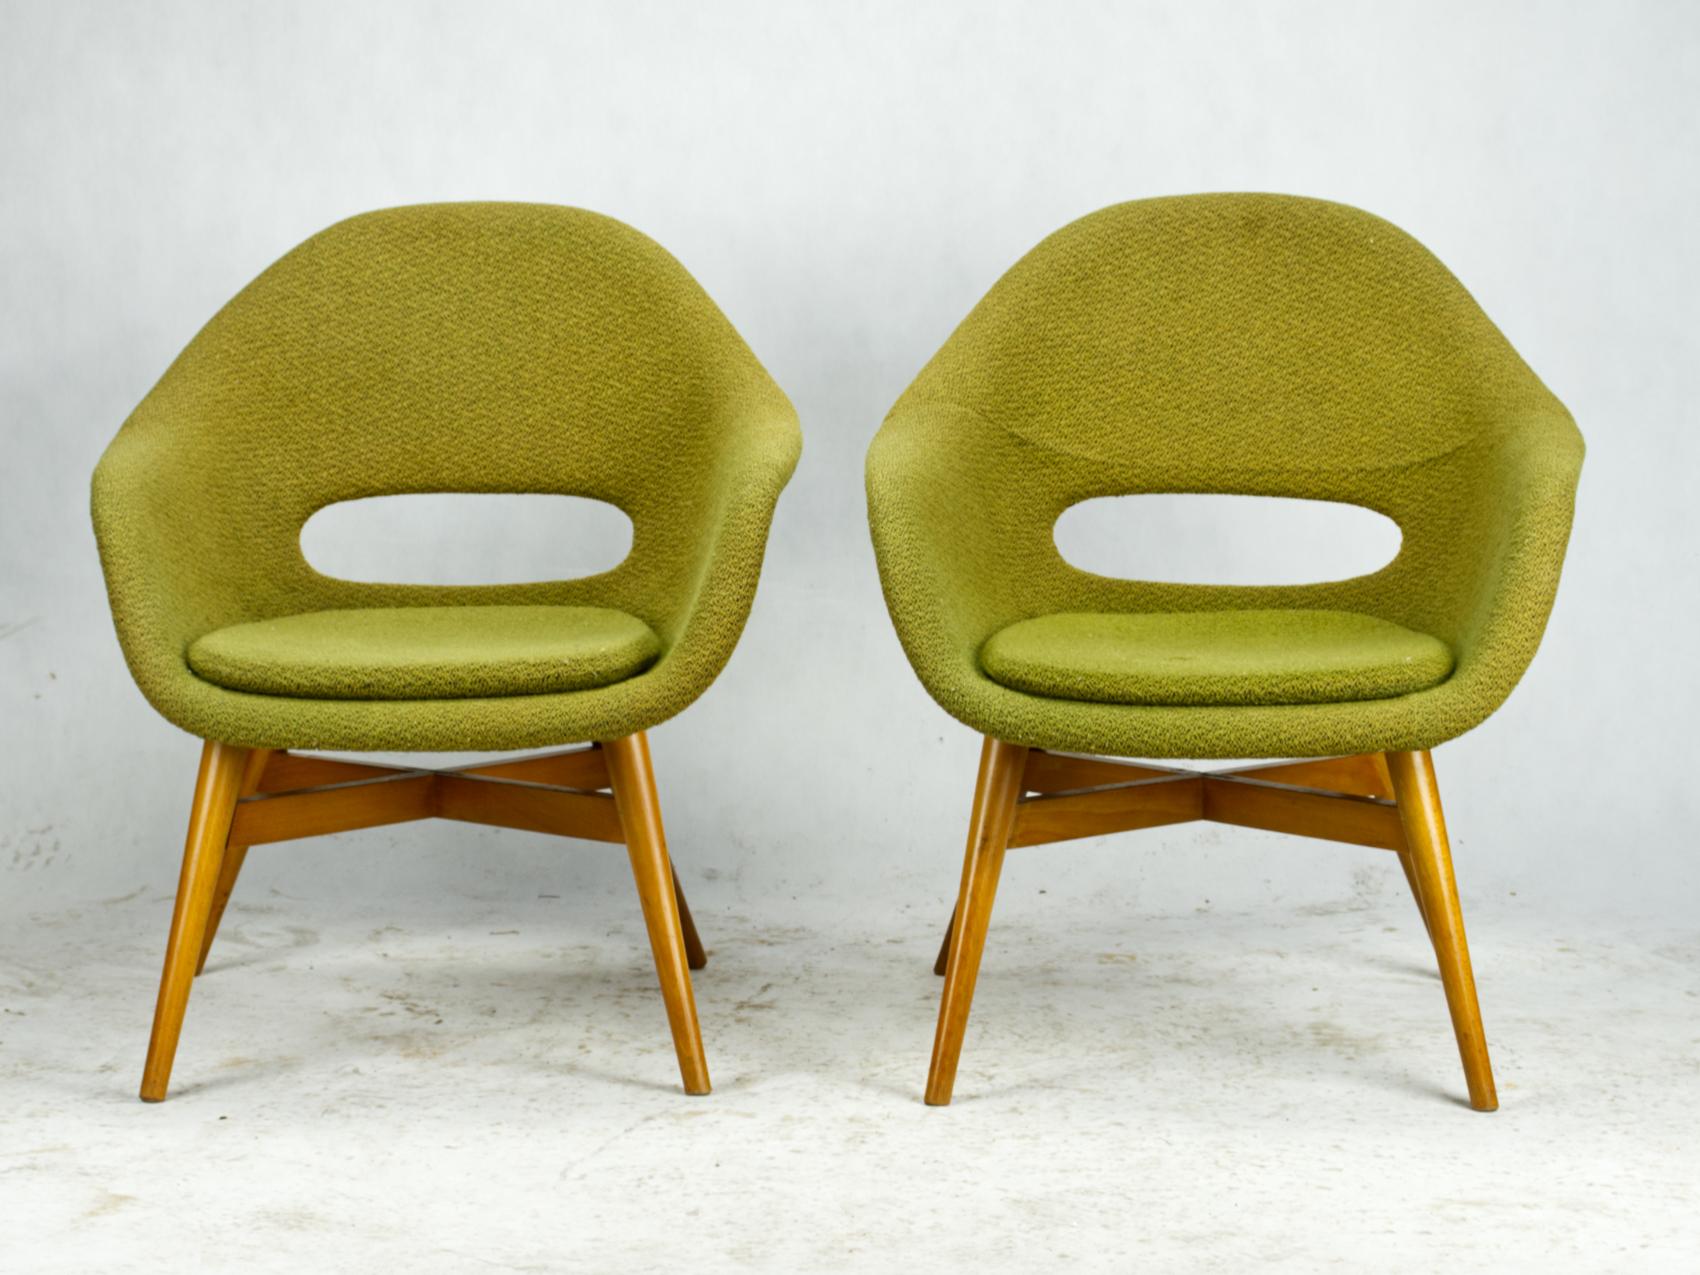 Beautiful set of two easy chairs by Miroslav Navratil, manufactured in Czechoslovakia by Cesky Nabytek, circa 1960.

The chairs have a beech plywood base and a fiber glass shell with original green fabric upholstery. They are rare symbolic pieces